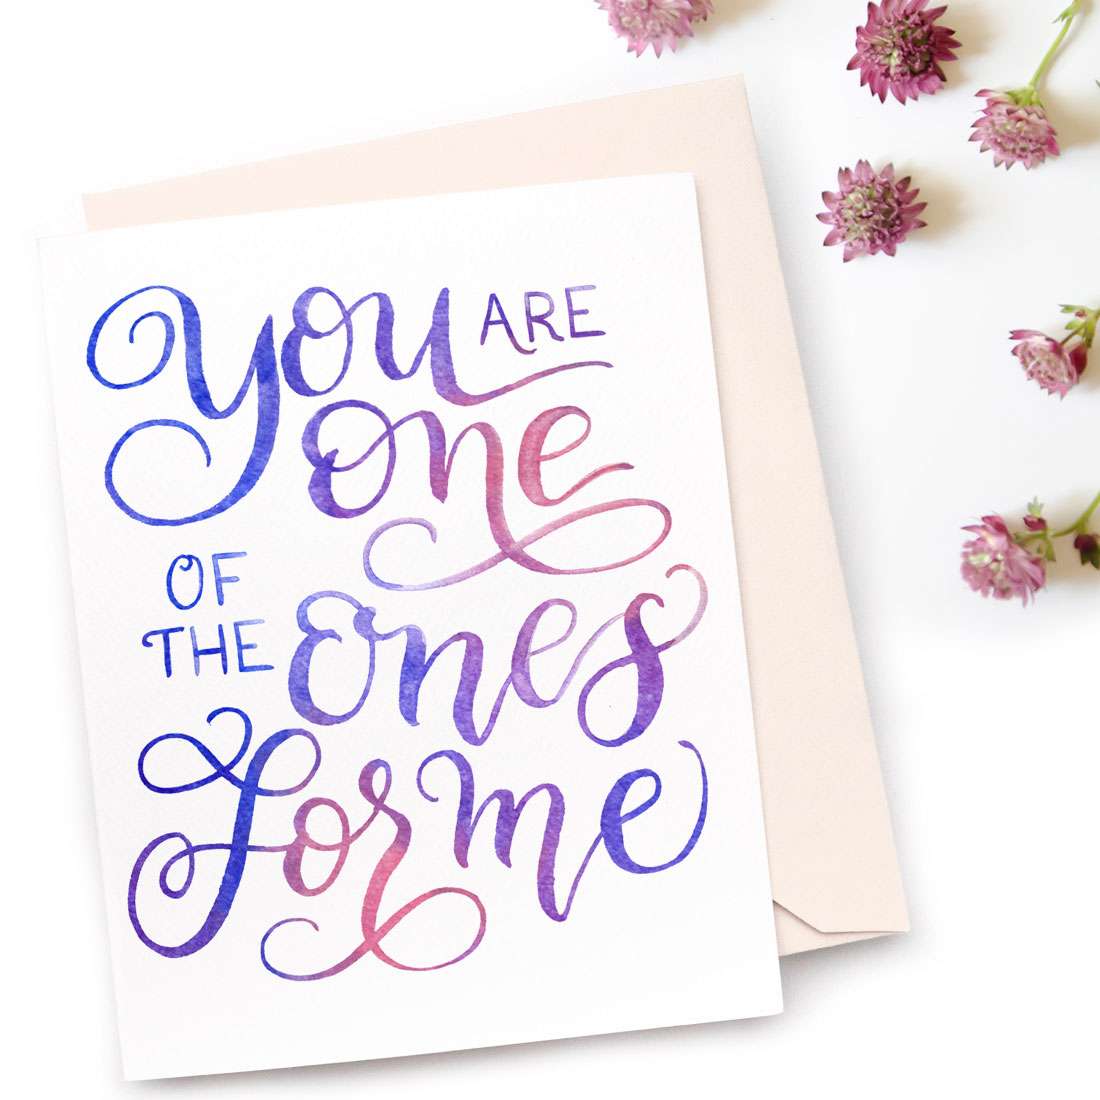 Image of a hand-lettered watercolor card saying "you are one of the ones for me" by CharmCat | charmcat.net